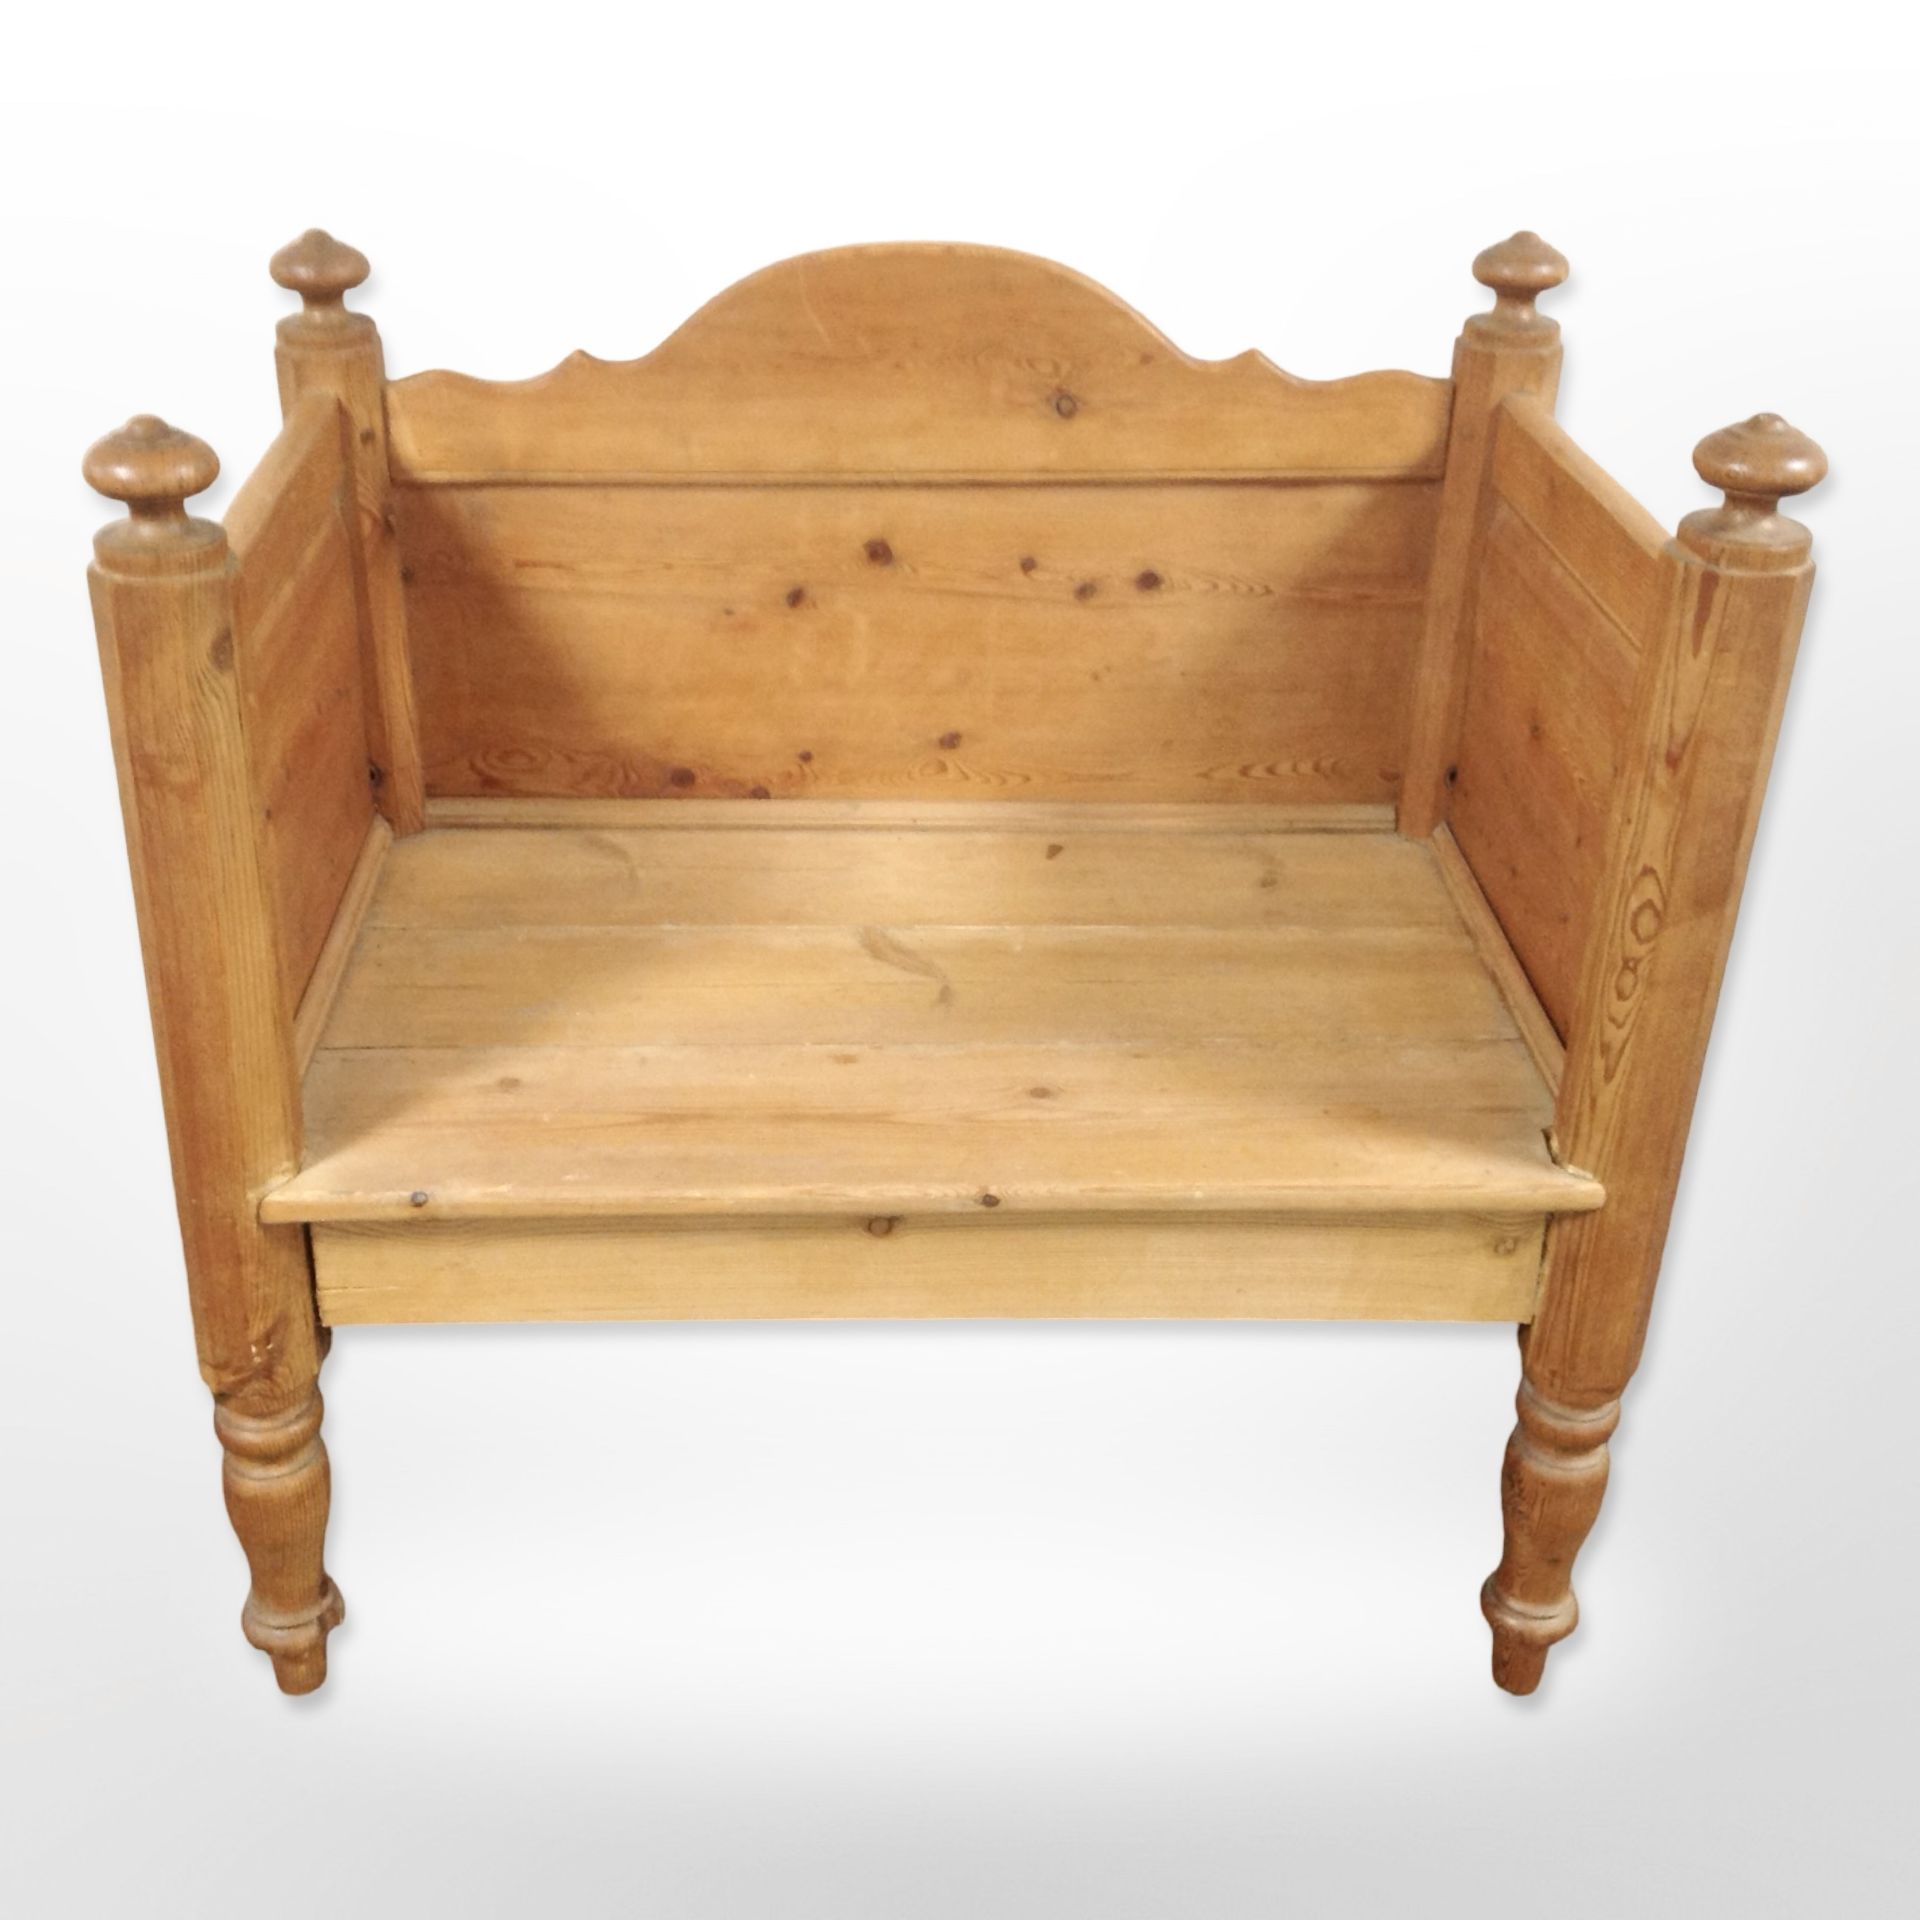 An early 20th century pine open chair,